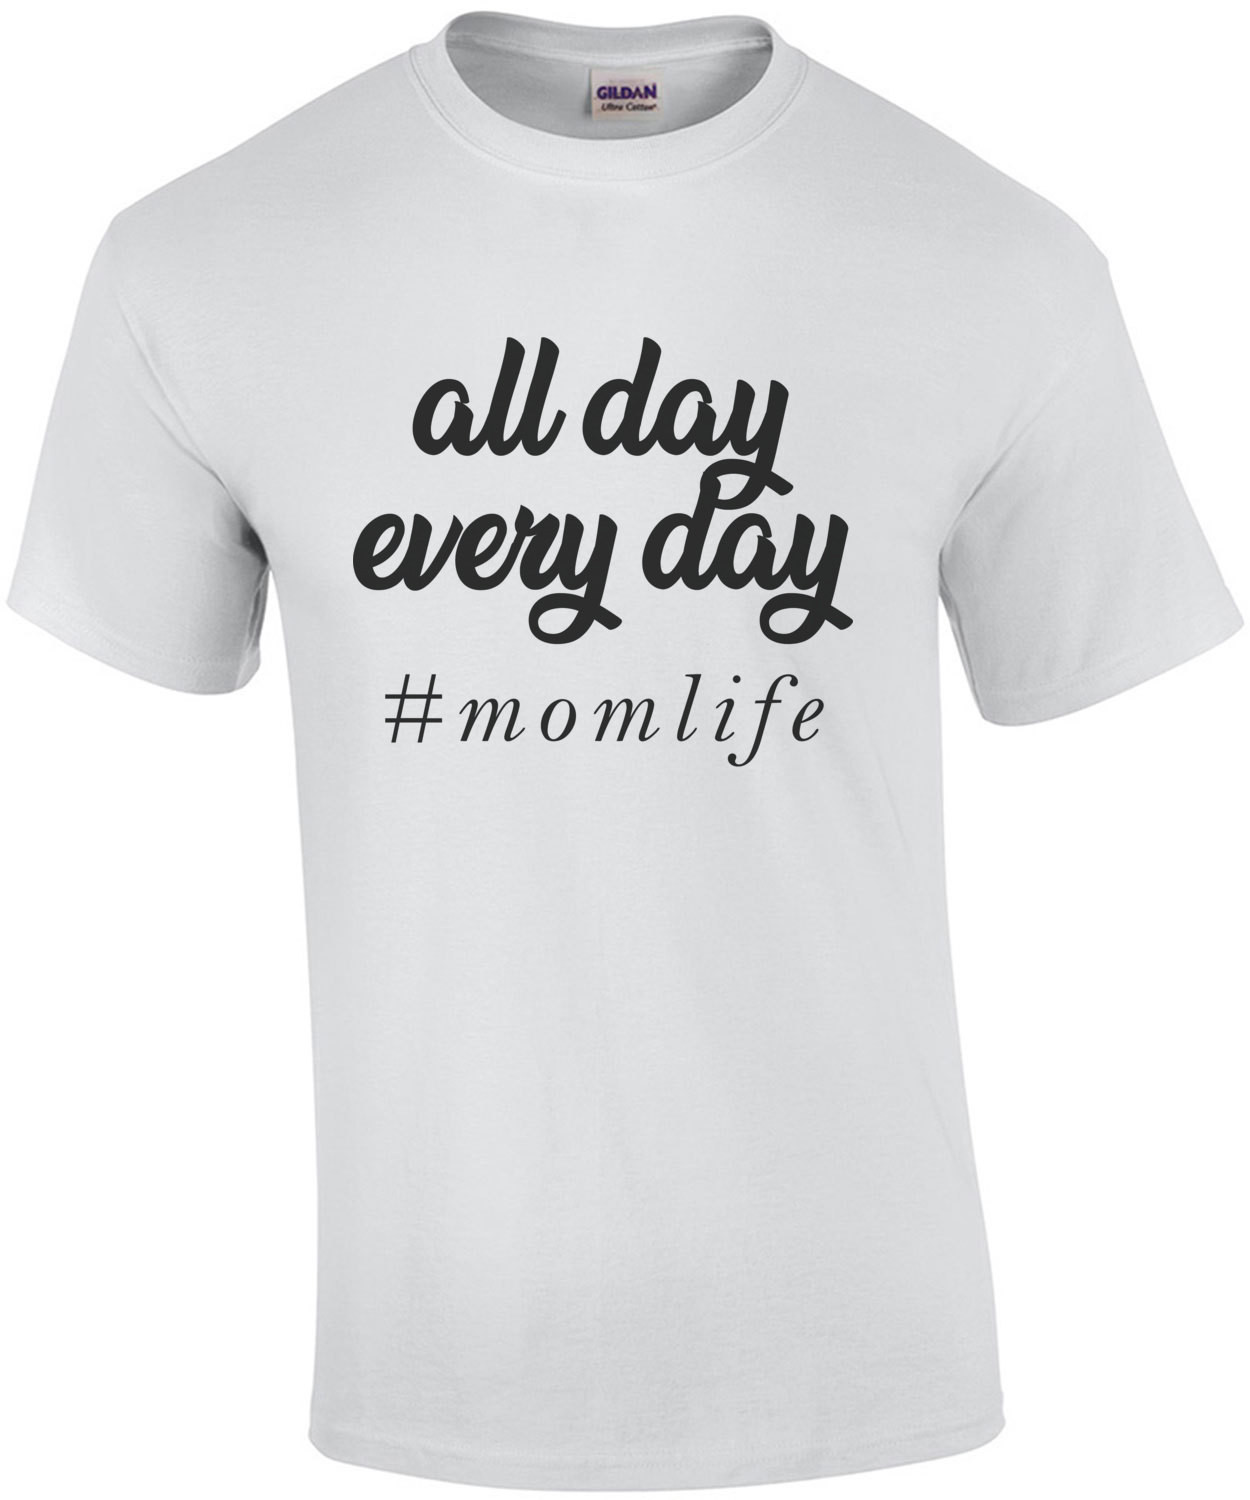 All day every day # momlife - funny mom t-shirt